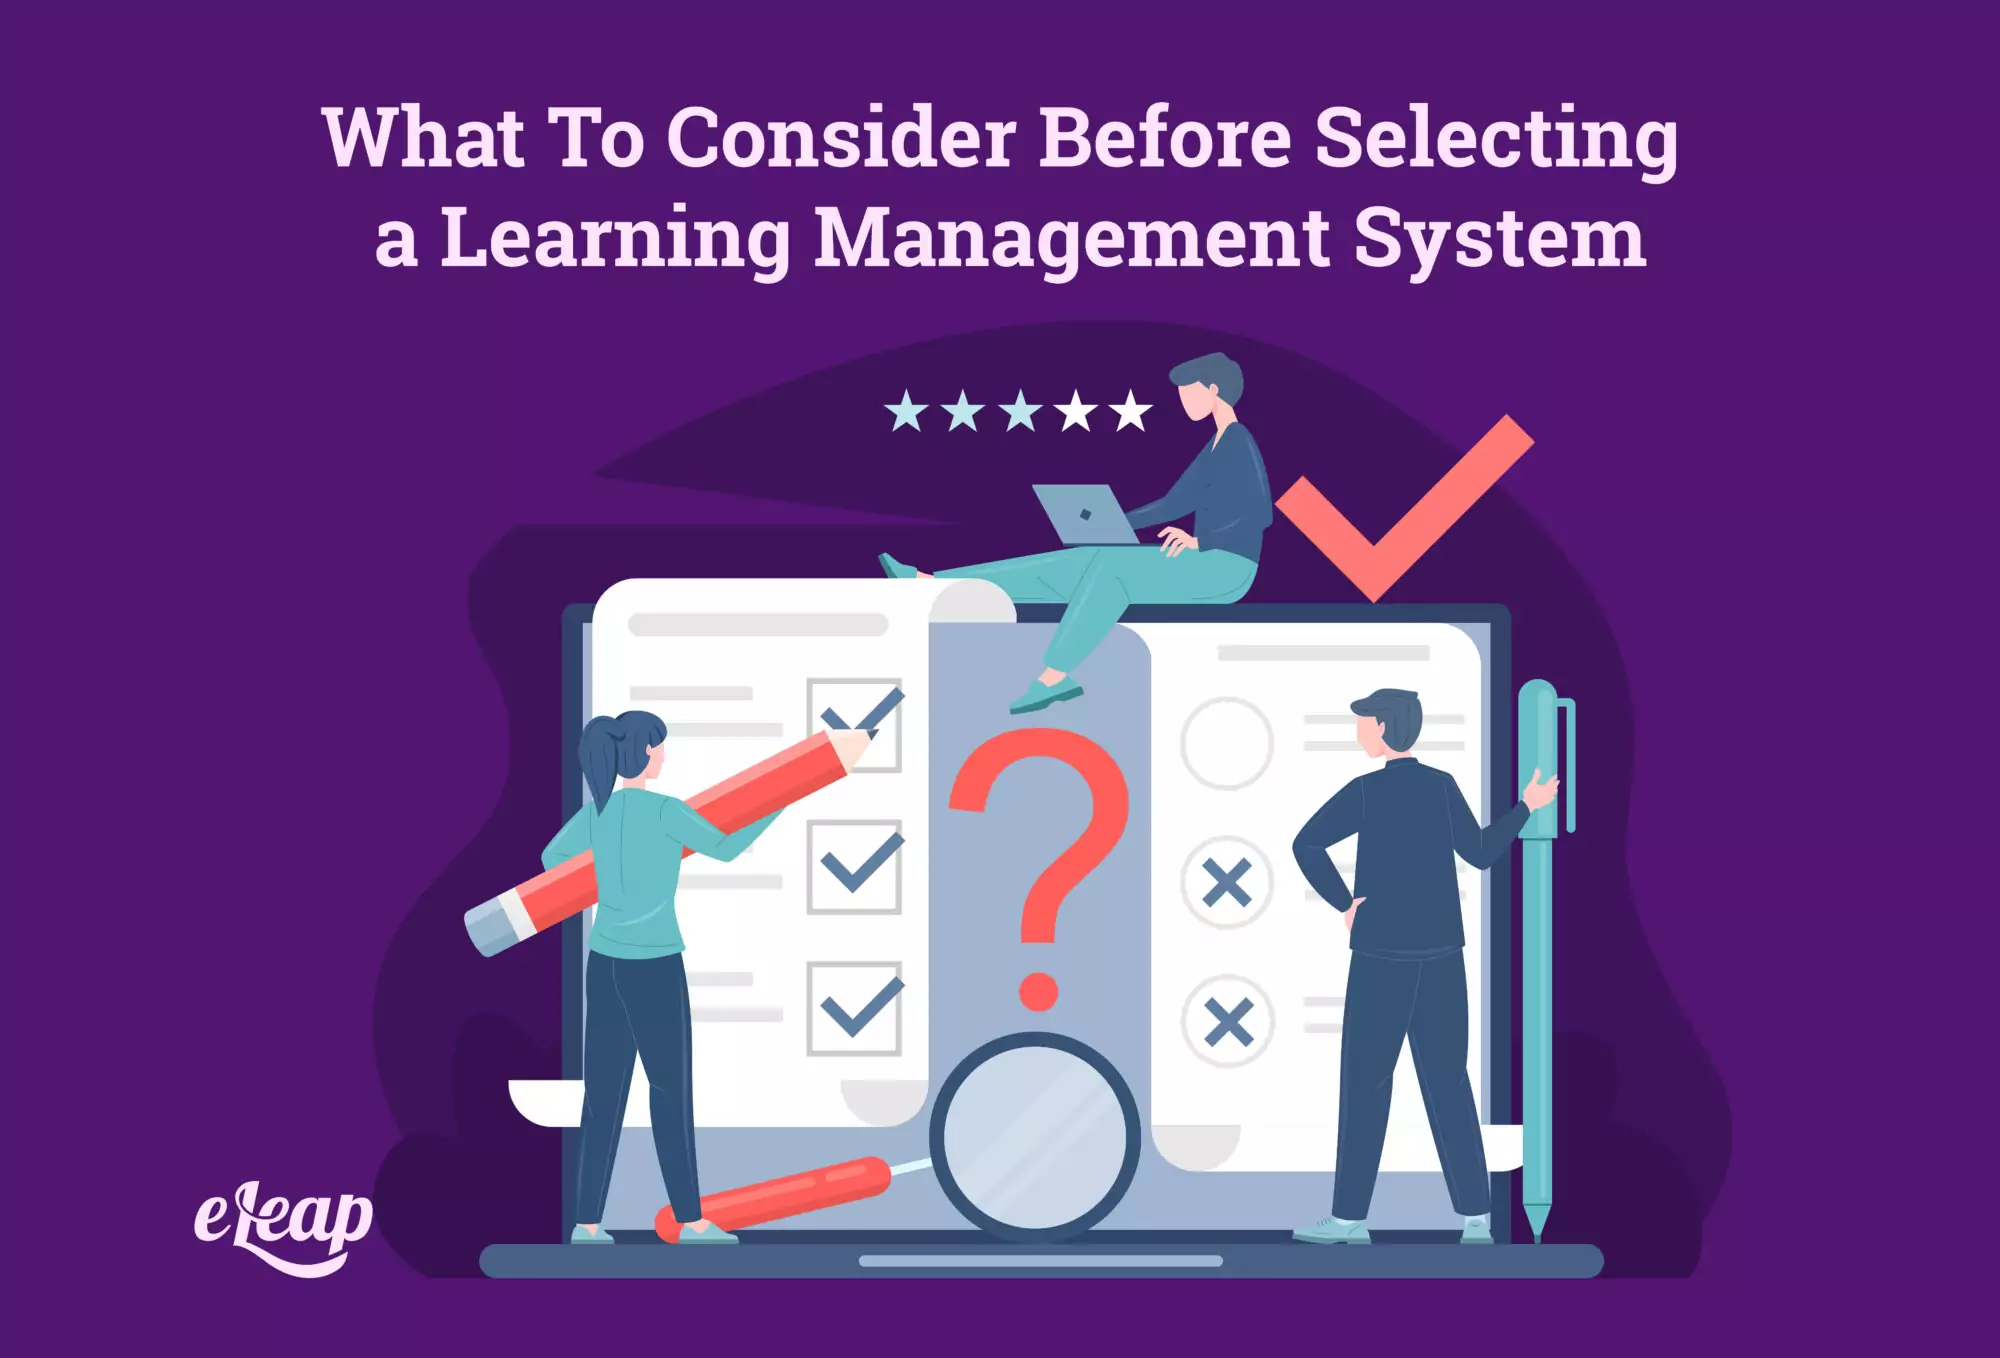 What To Consider Before Selecting a Learning Management System - eLeaP